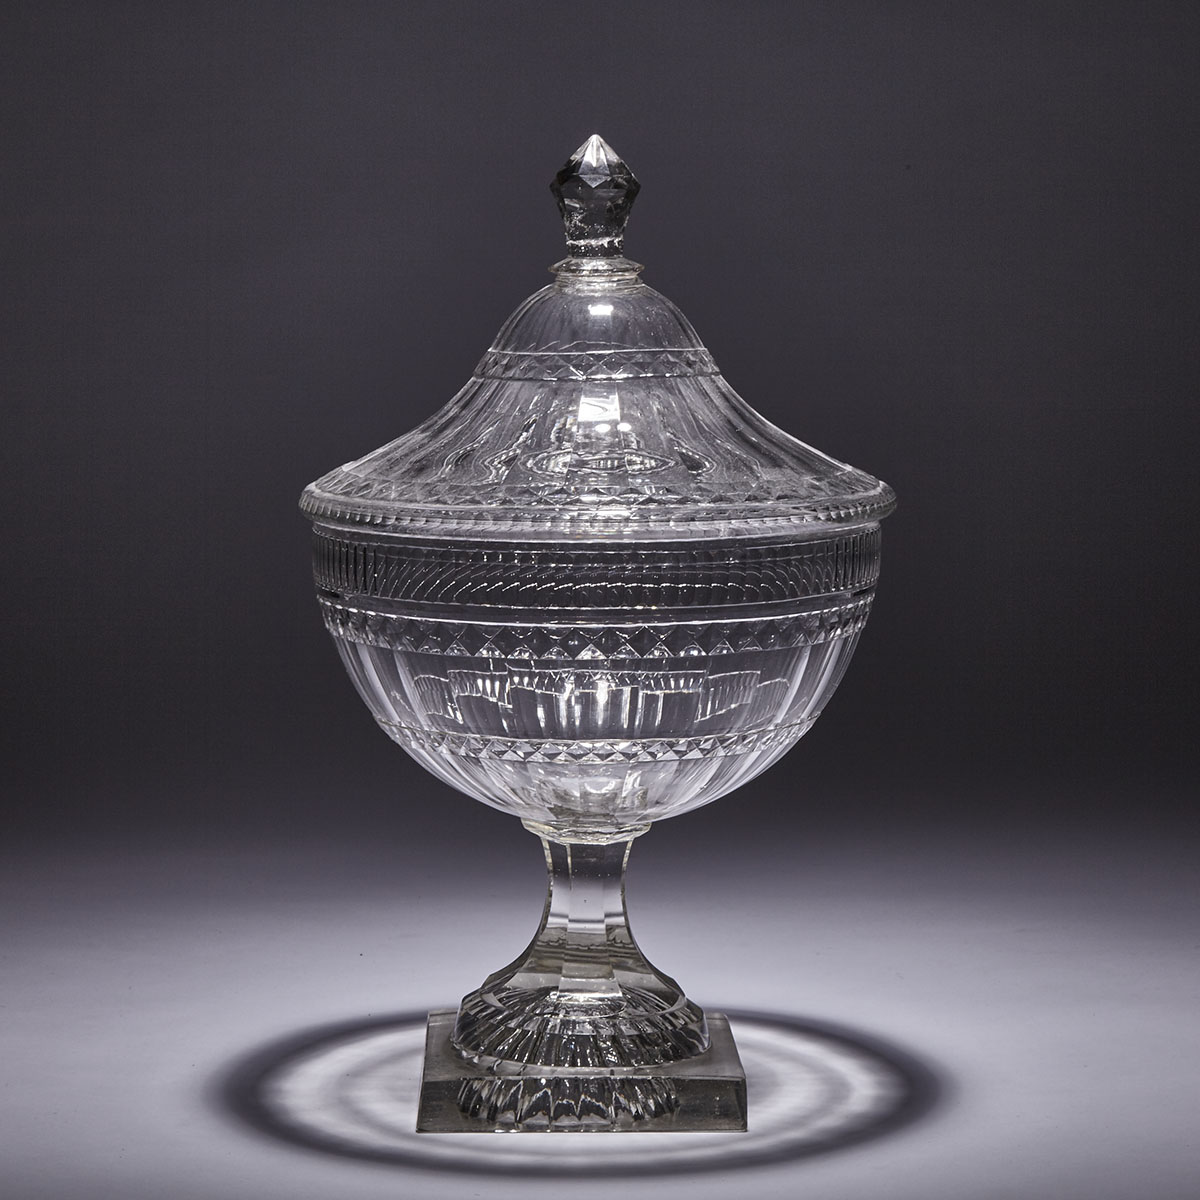 Anglo-Irish Cut Glass Footed Bowl and Cover, c.1800